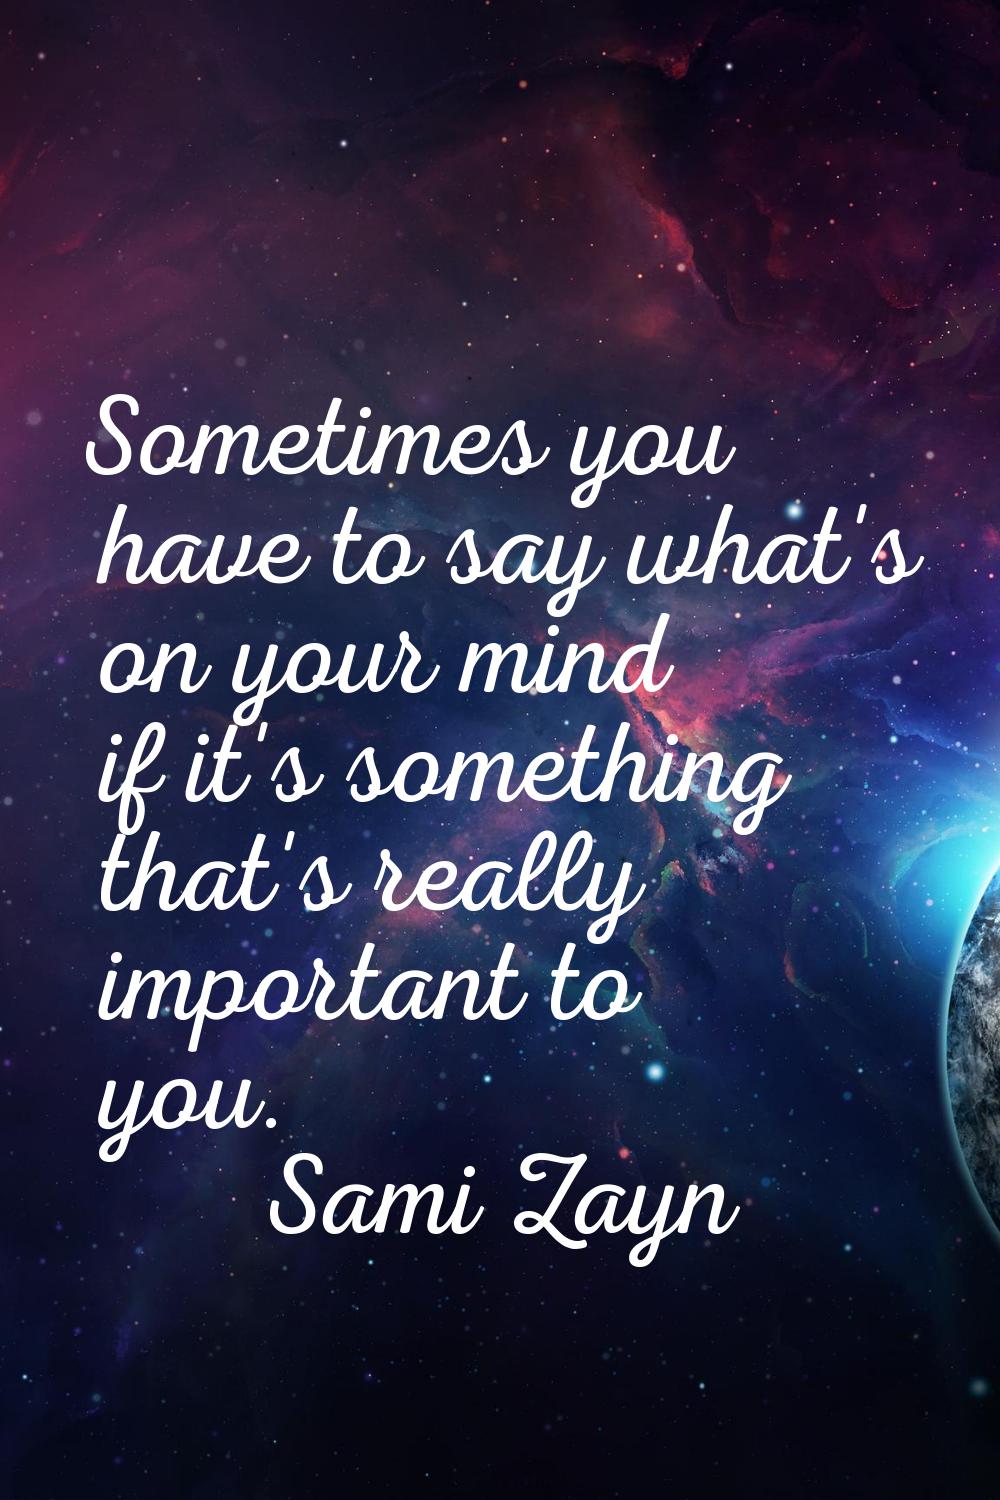 Sometimes you have to say what's on your mind if it's something that's really important to you.